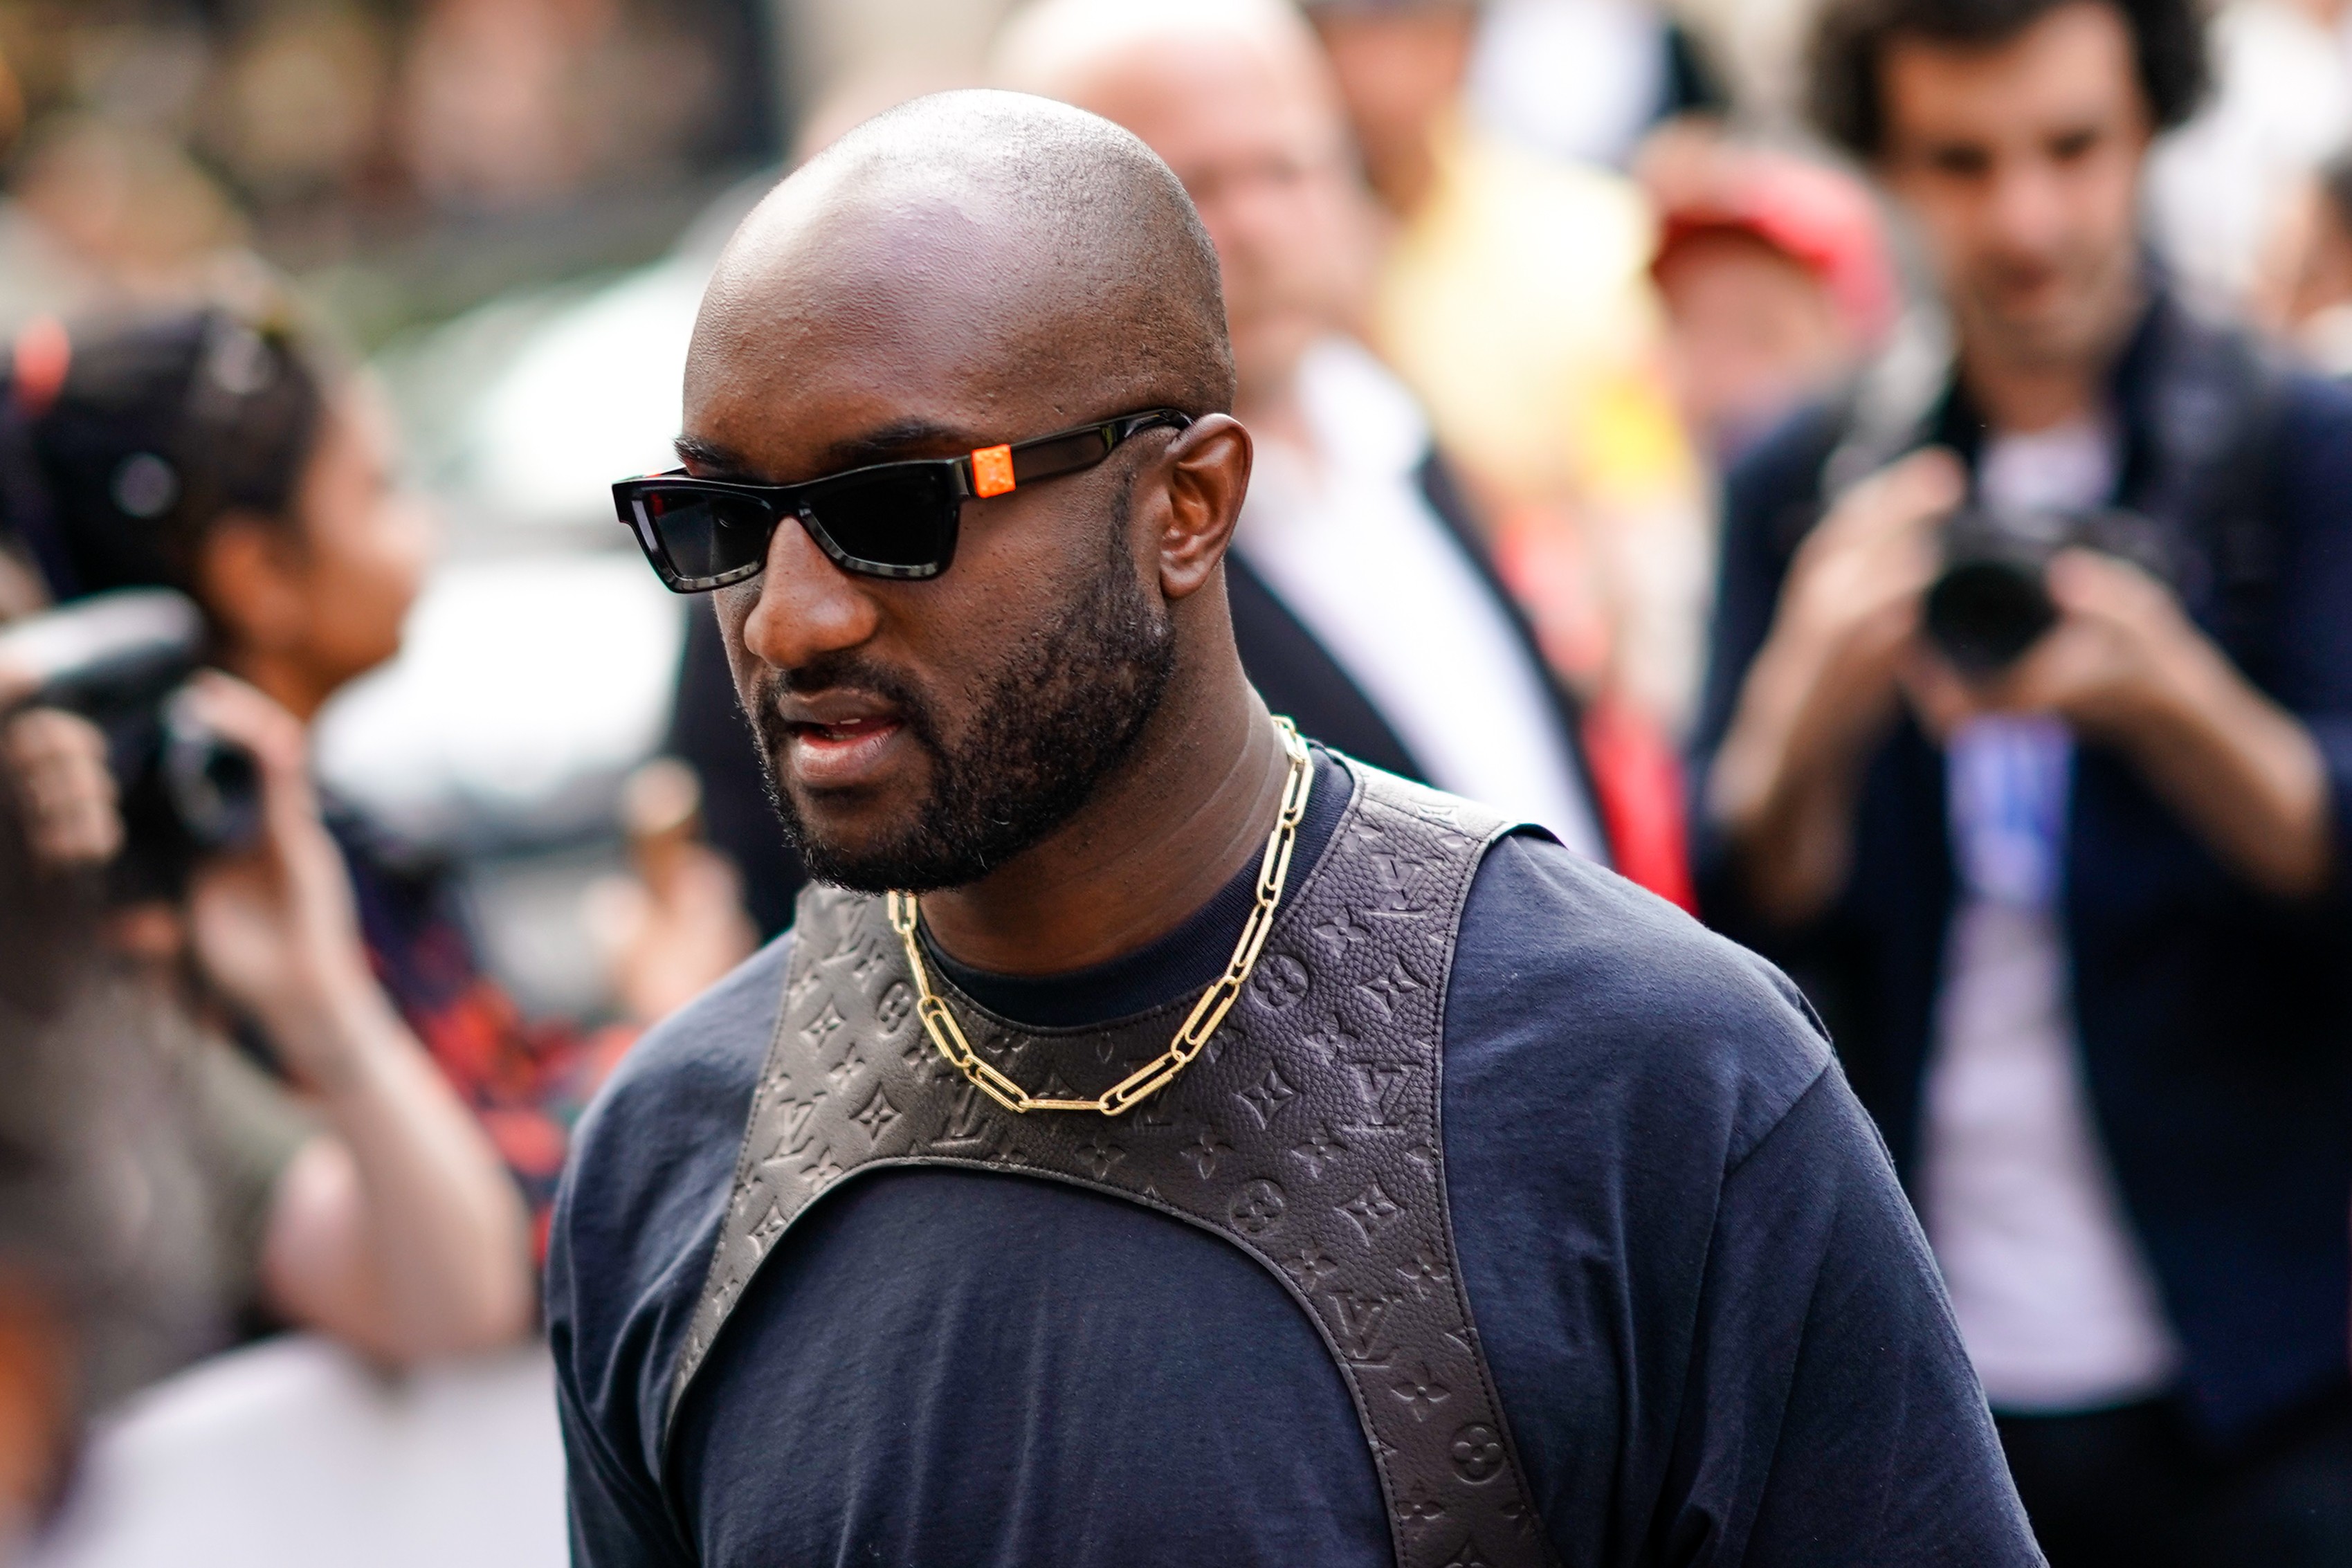 VIRGIL ABLOH - CREATIVE ADVICE, BRAND BUILDING, AND TOXIC PERFECTIONISM 